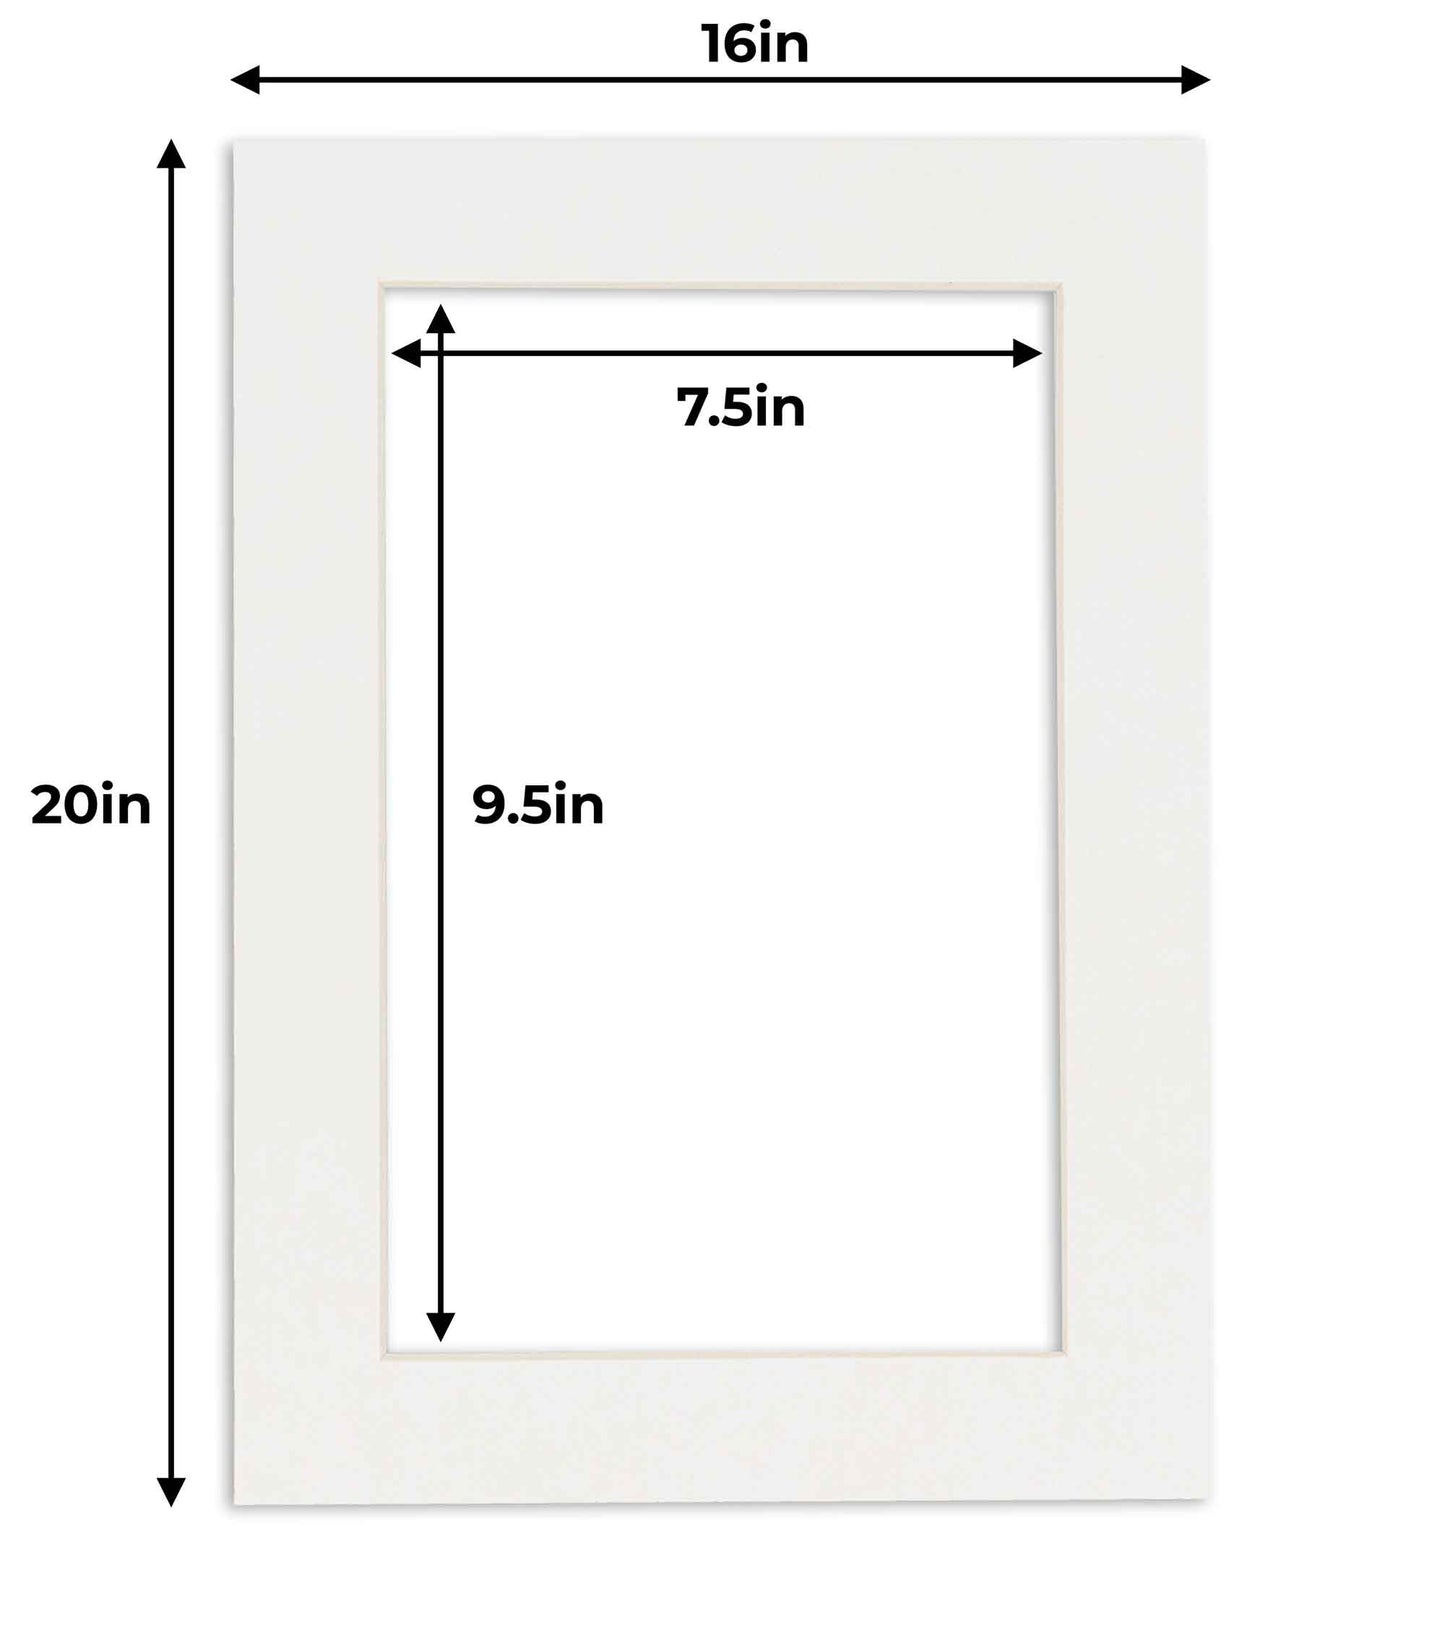 Pack of 25 Textured White Precut Acid-Free Matboard Set with Clear Bags & Backings